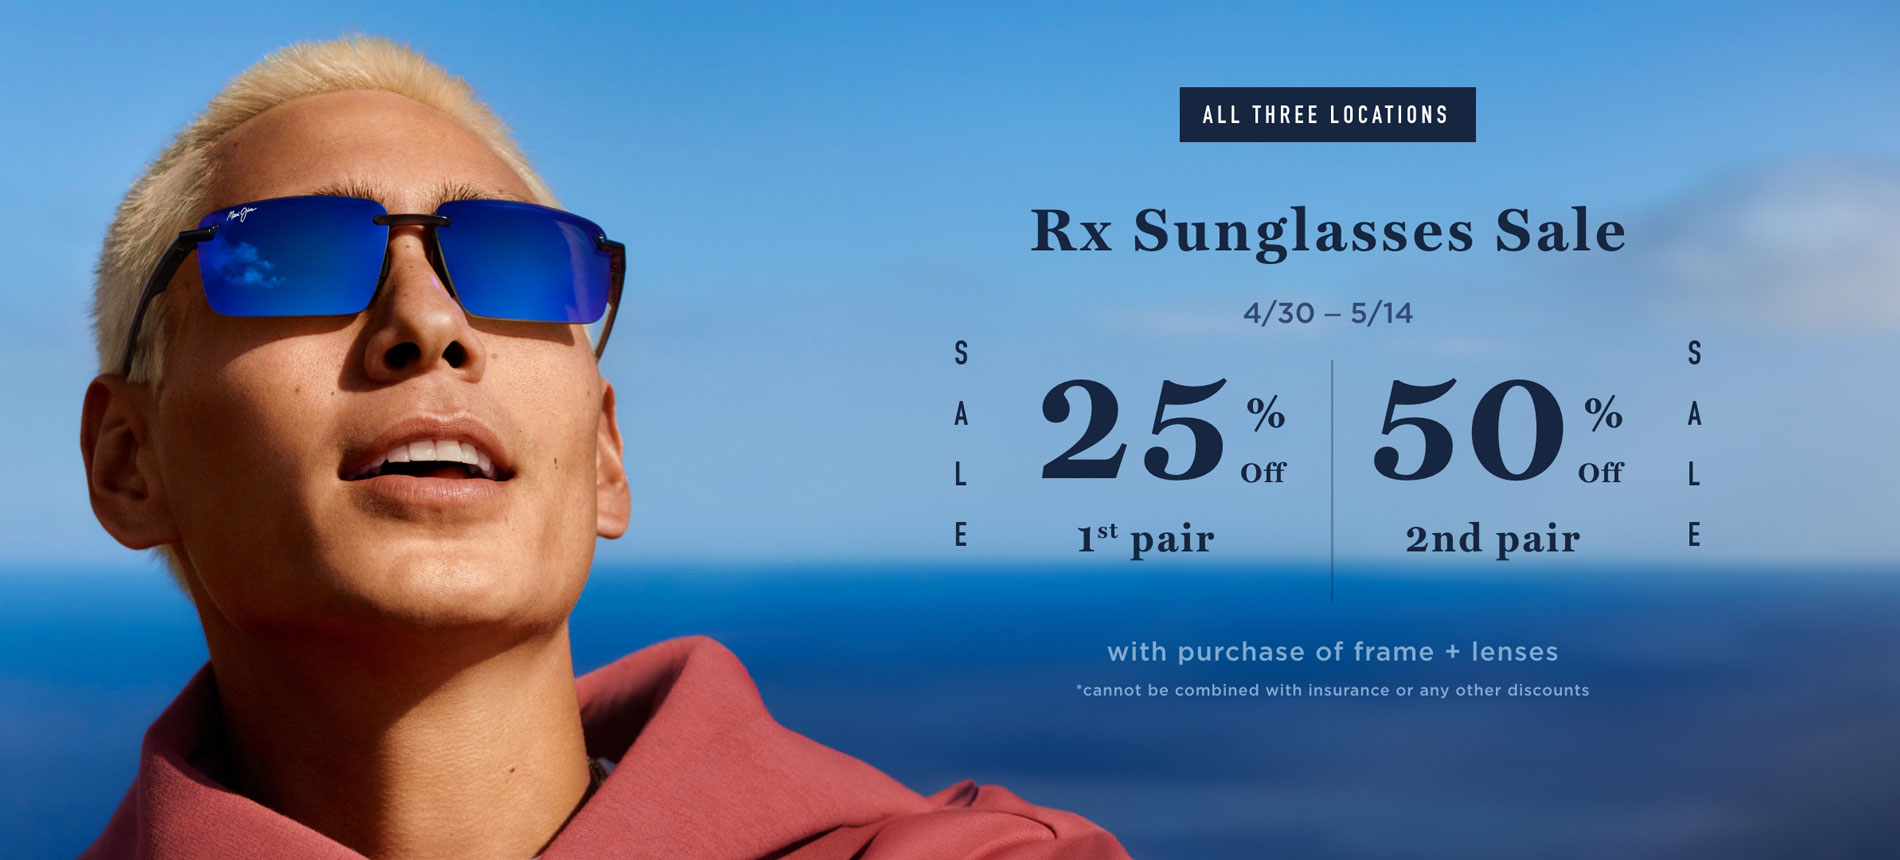 All three locations. Rx sunglasses sale. 4/30 - 5/14. 25% off 1st pair. 50% off 2nd pair. With purchase of frame + lenses. *cannot be combined with insurance or any other discounts.